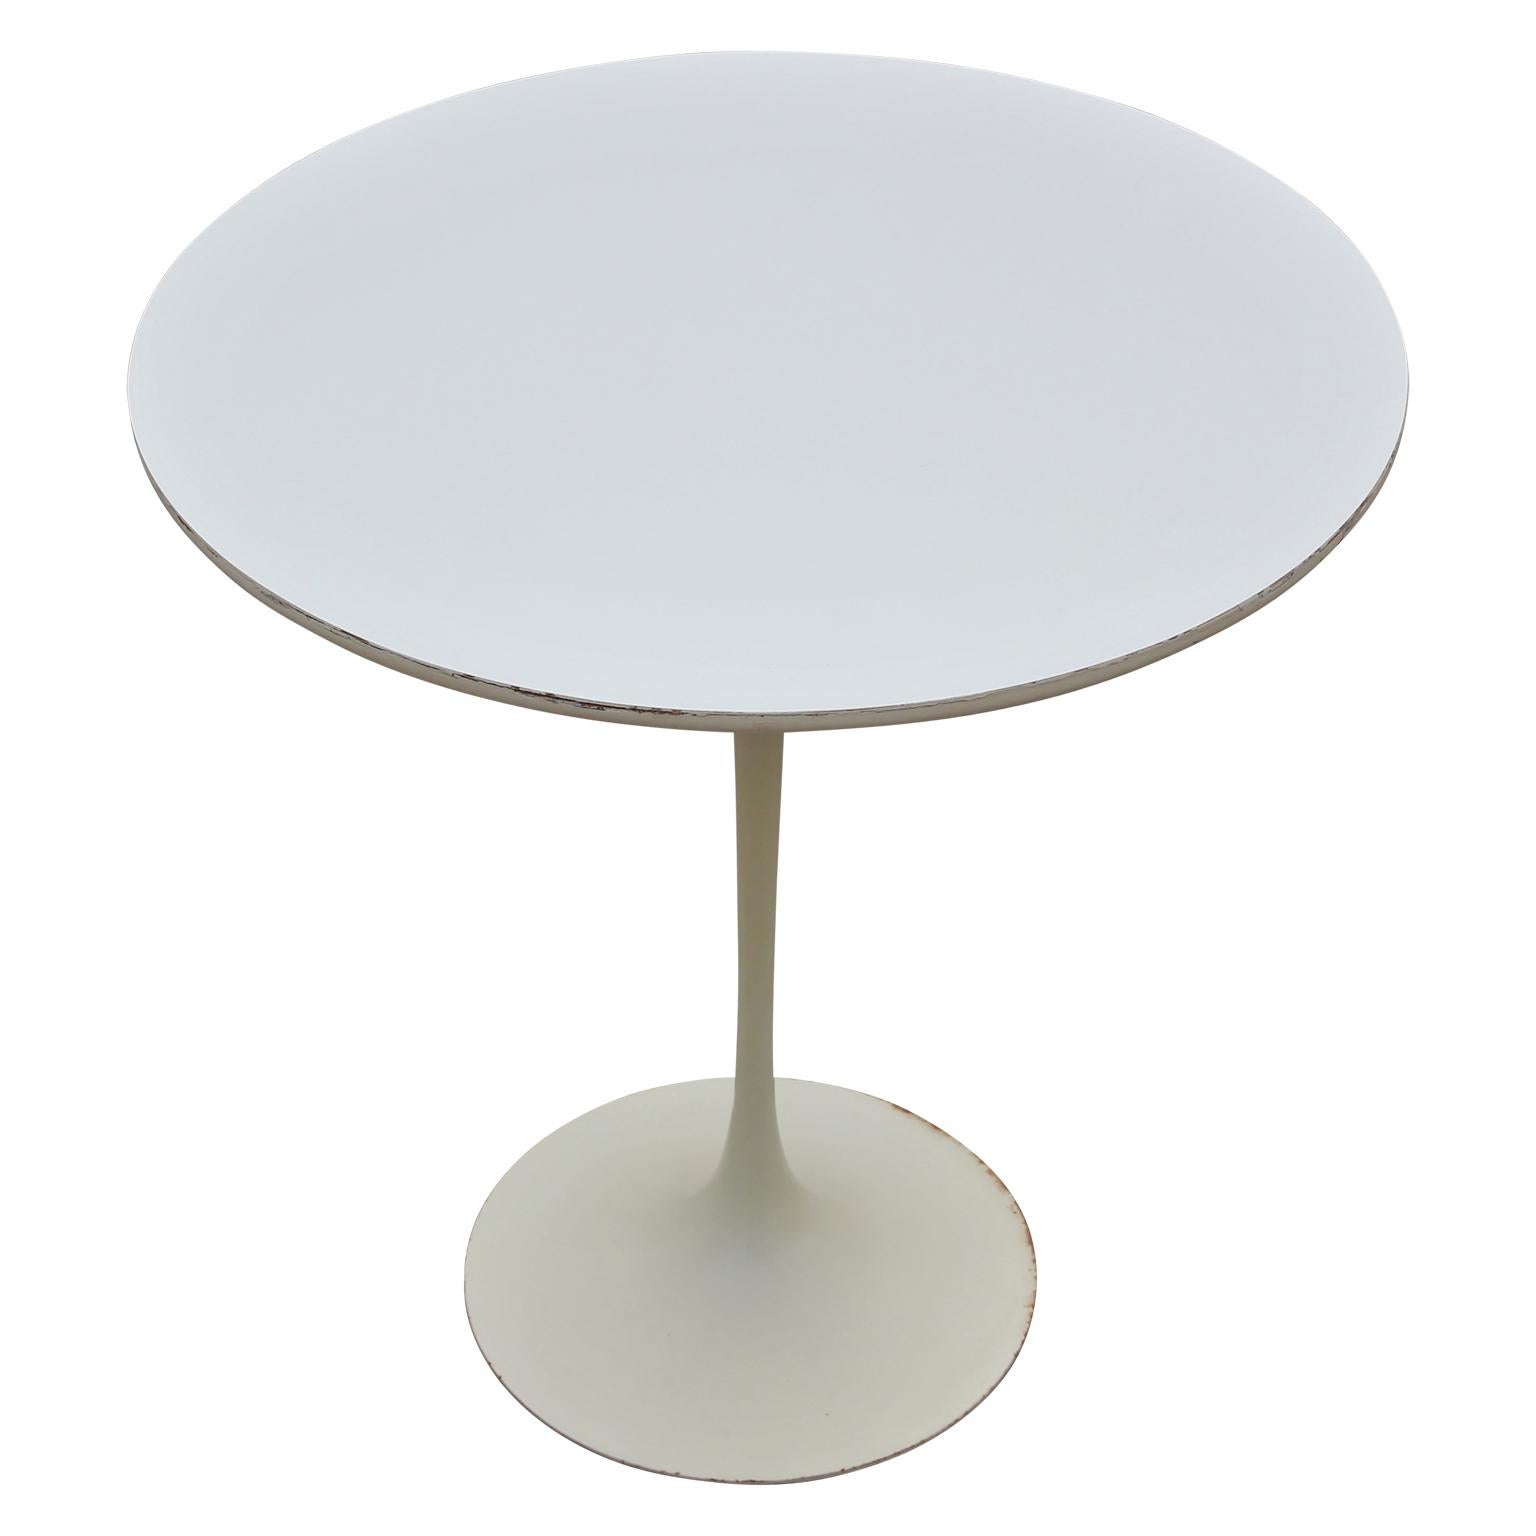 An excellent vintage E. Saarinen for Knoll side table. Early production with Knoll label present on the bottom of the table. 20 inch diameter round white laminate top with beveled underside edge. Cast iron base is powder coated in gloss white.